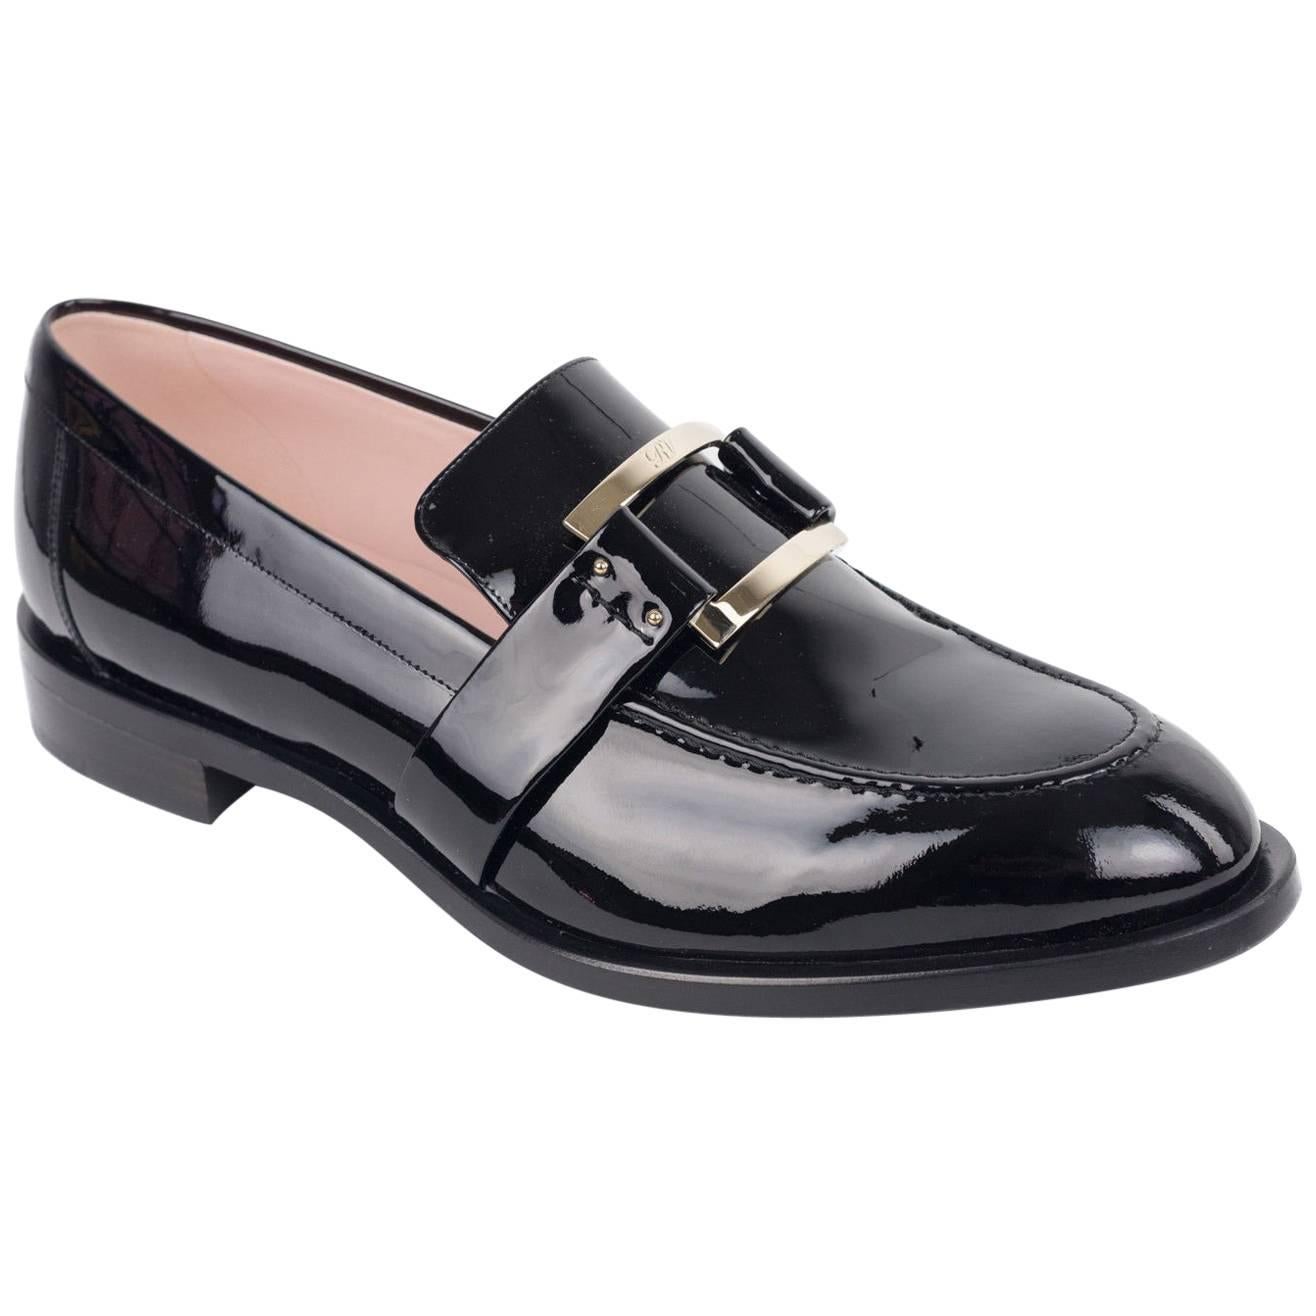 Roger Vivier Women's 30mm Black Patent Leather Loafers 